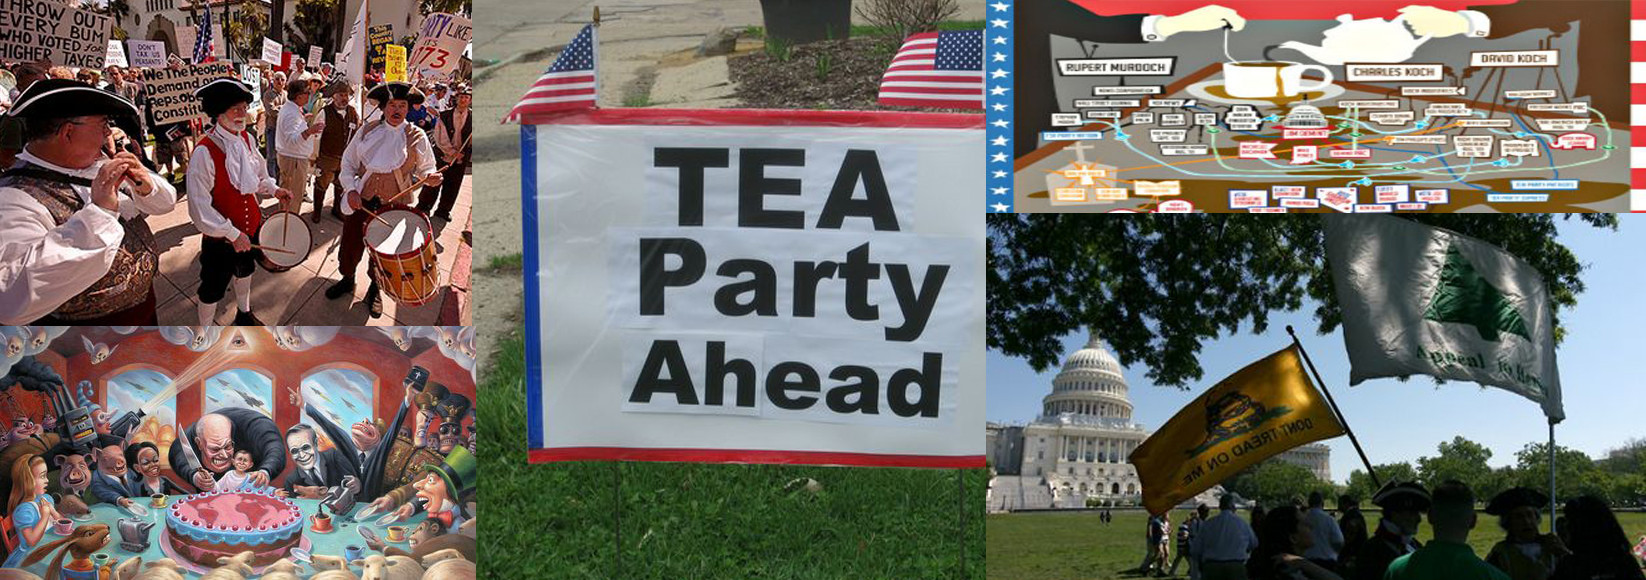 Republican Tea Party Ideas
 “Beat the snot out of the Tea Party ” That’s the